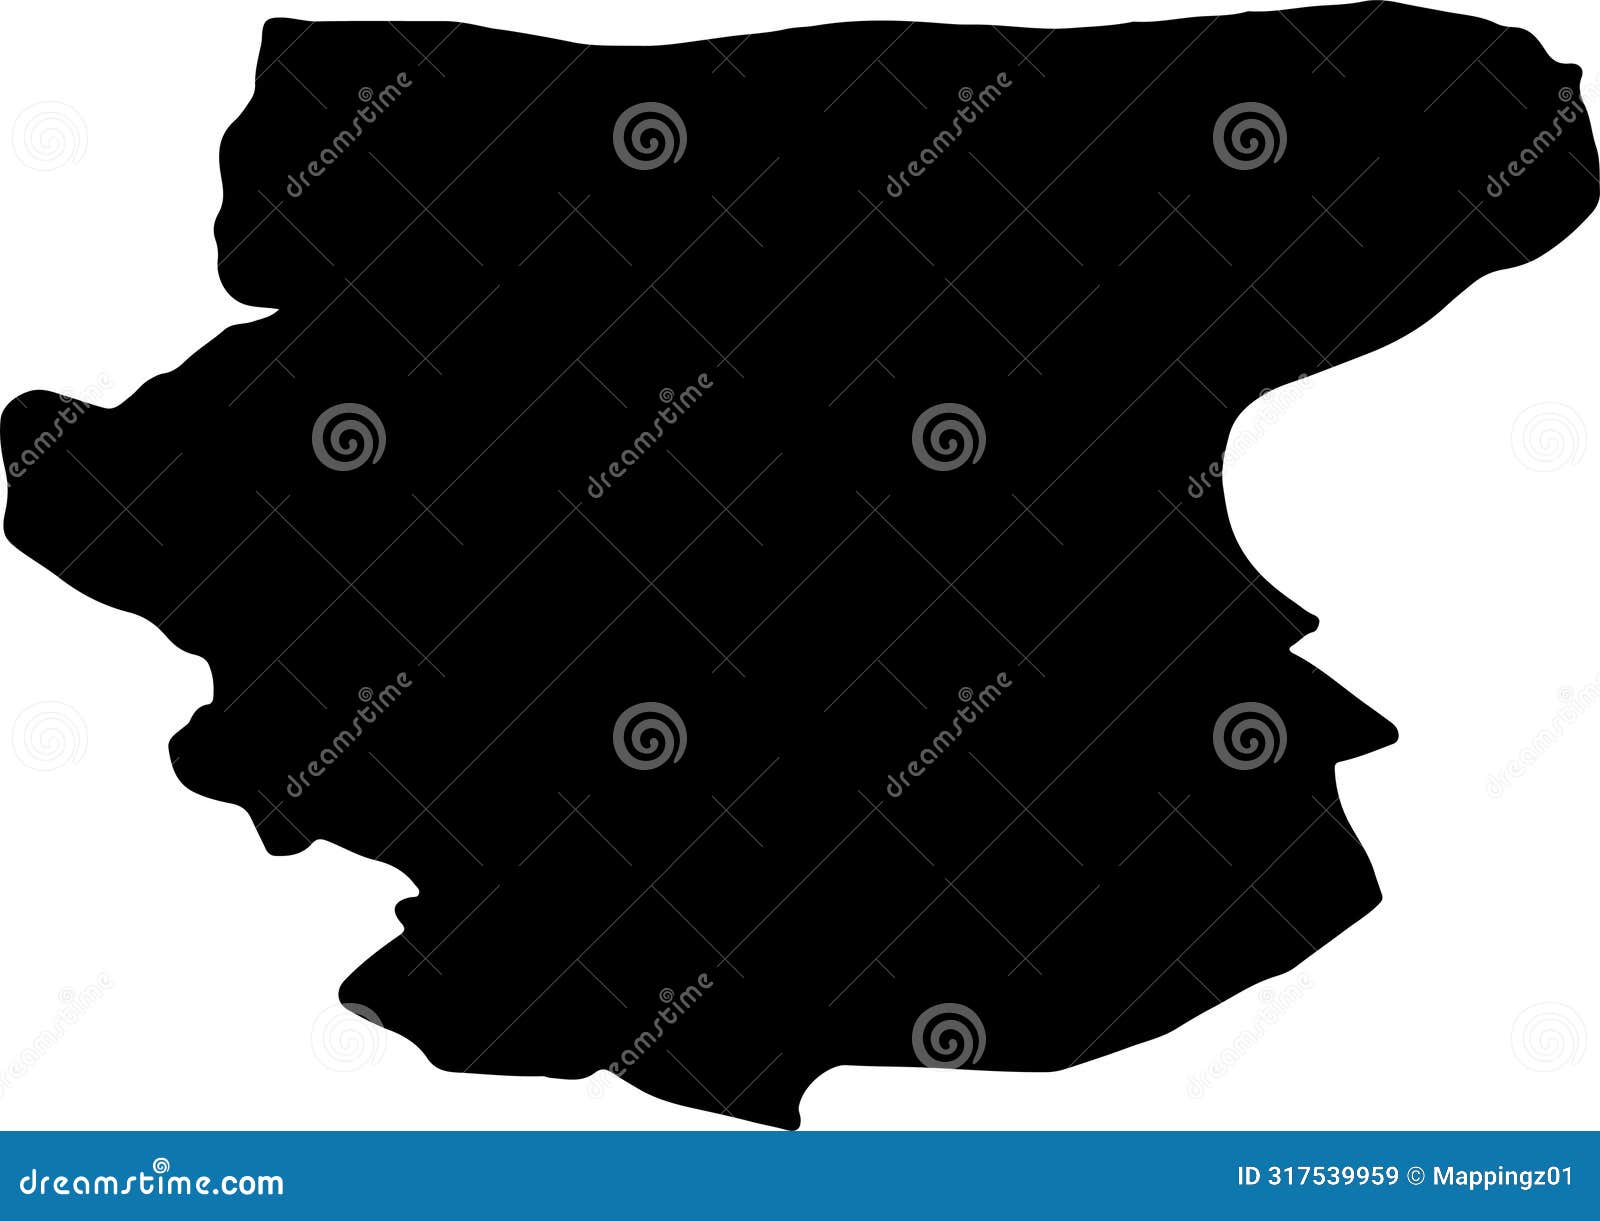 foggia italy silhouette map with transparent background